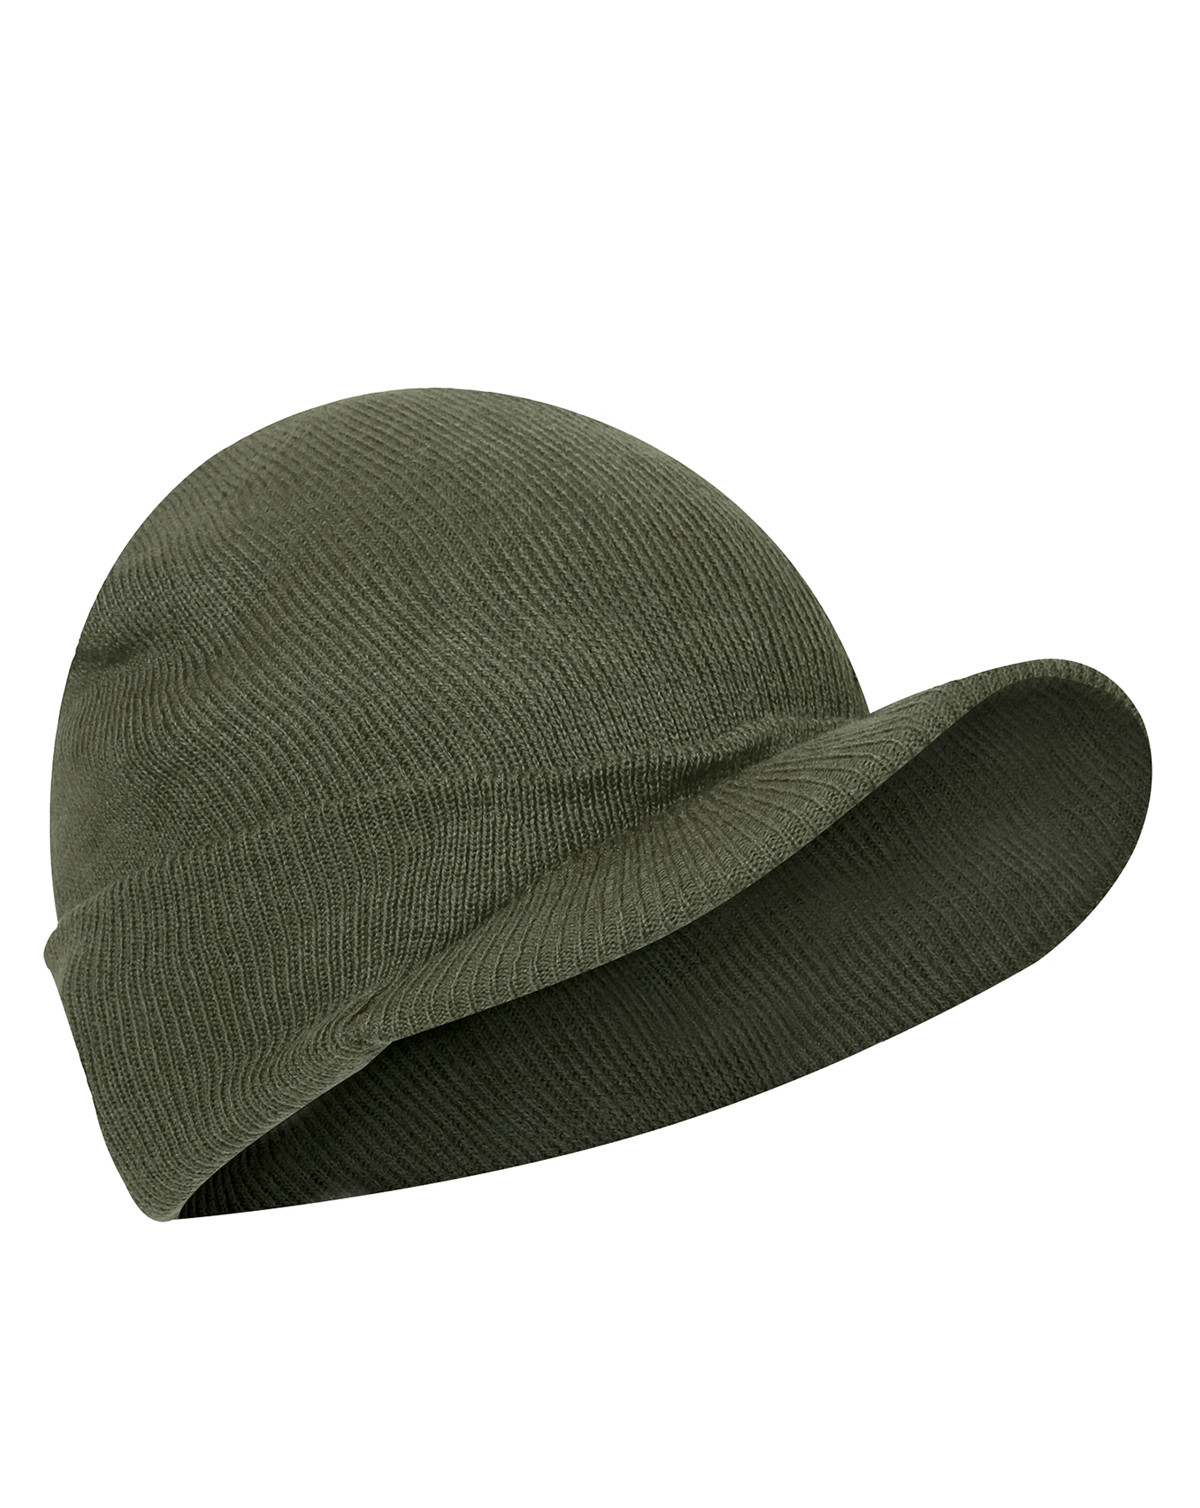 Rothco Deluxe Jeep Cap (Oliven, One Size)